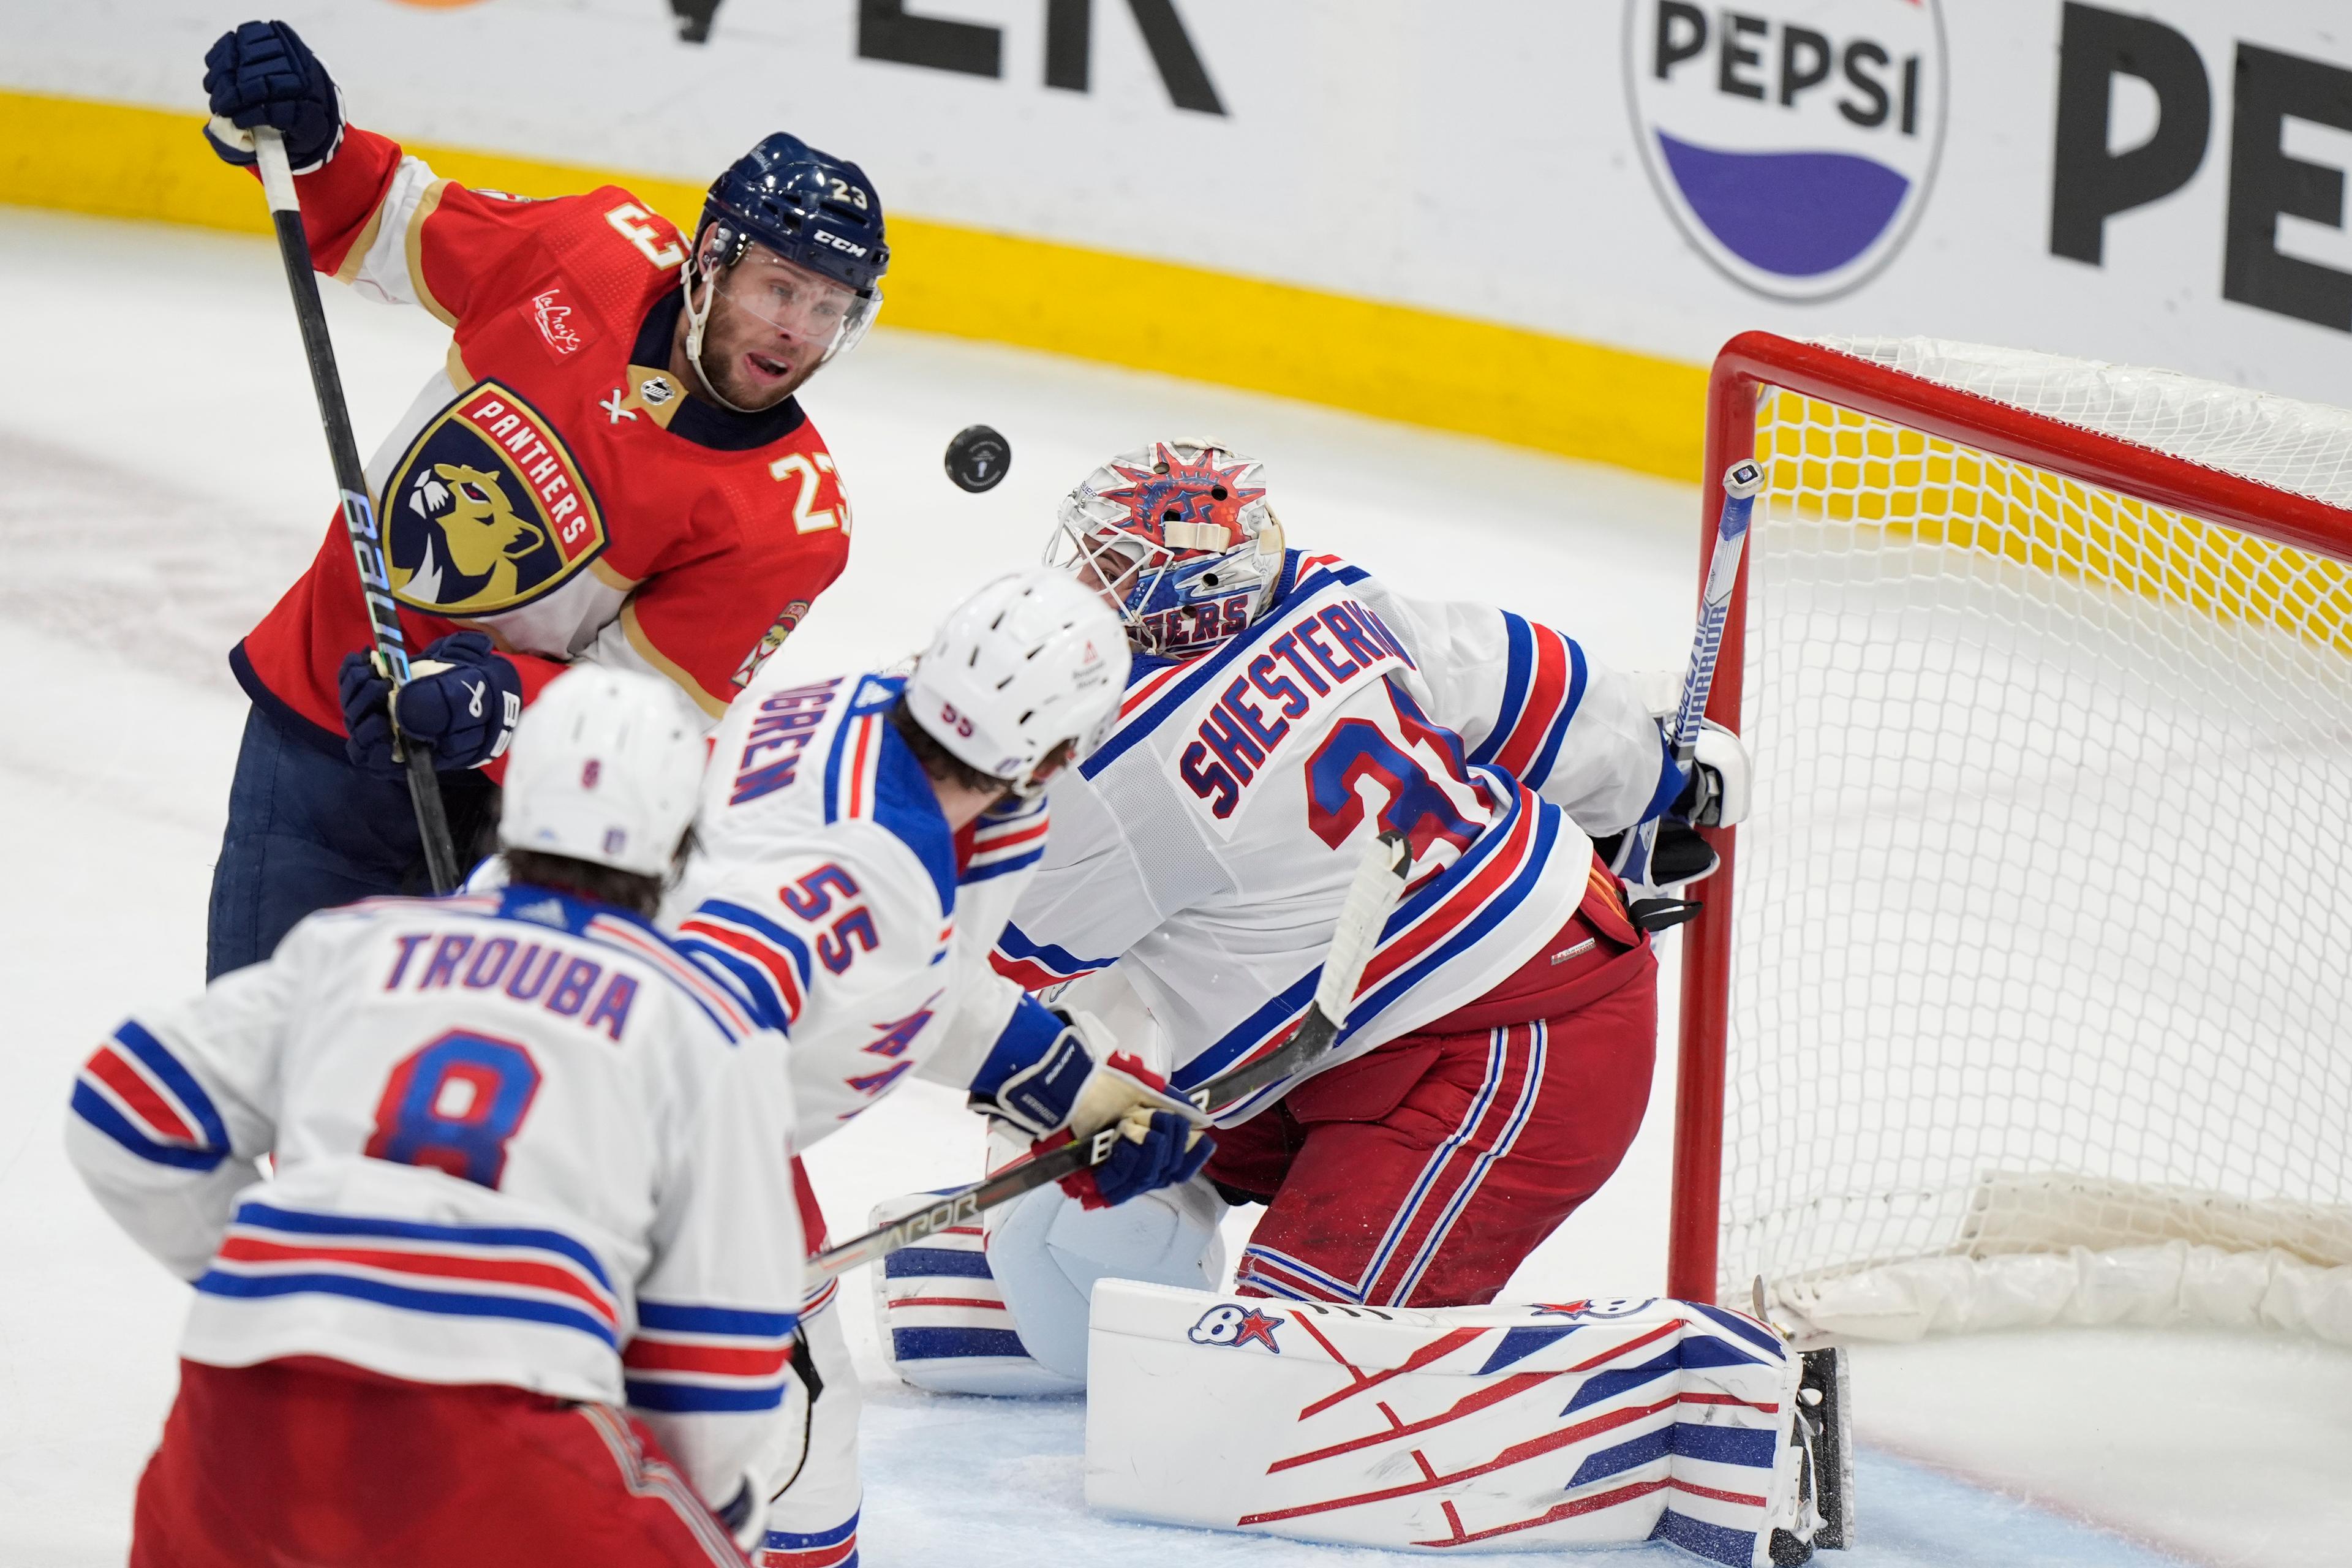 Reinhart’s Overtime Goal Gets Panthers Even With Rangers in Eastern Conference Final